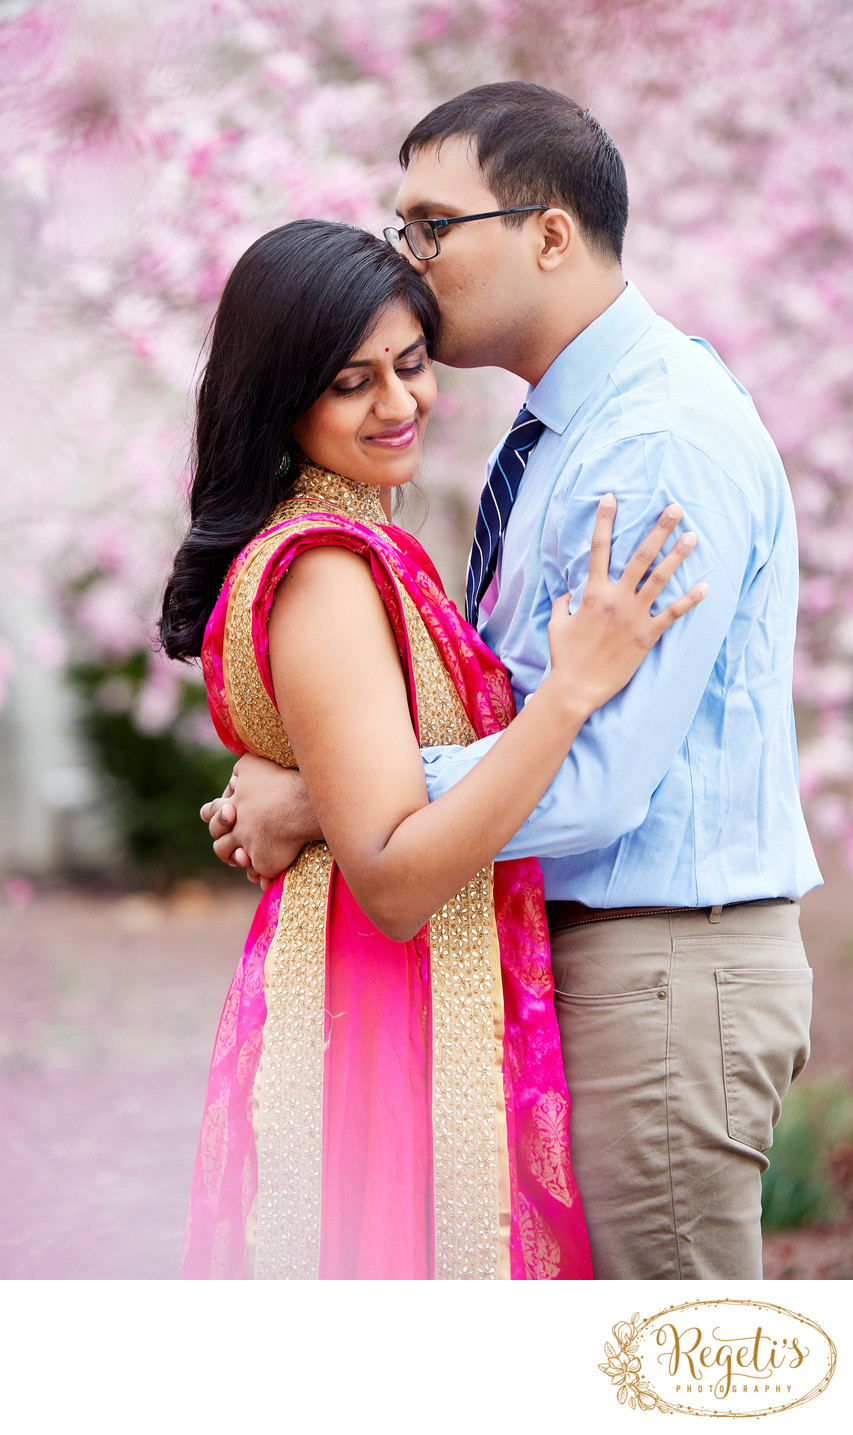 South Asian Bride and Groom during Cherry Blossoms, DC